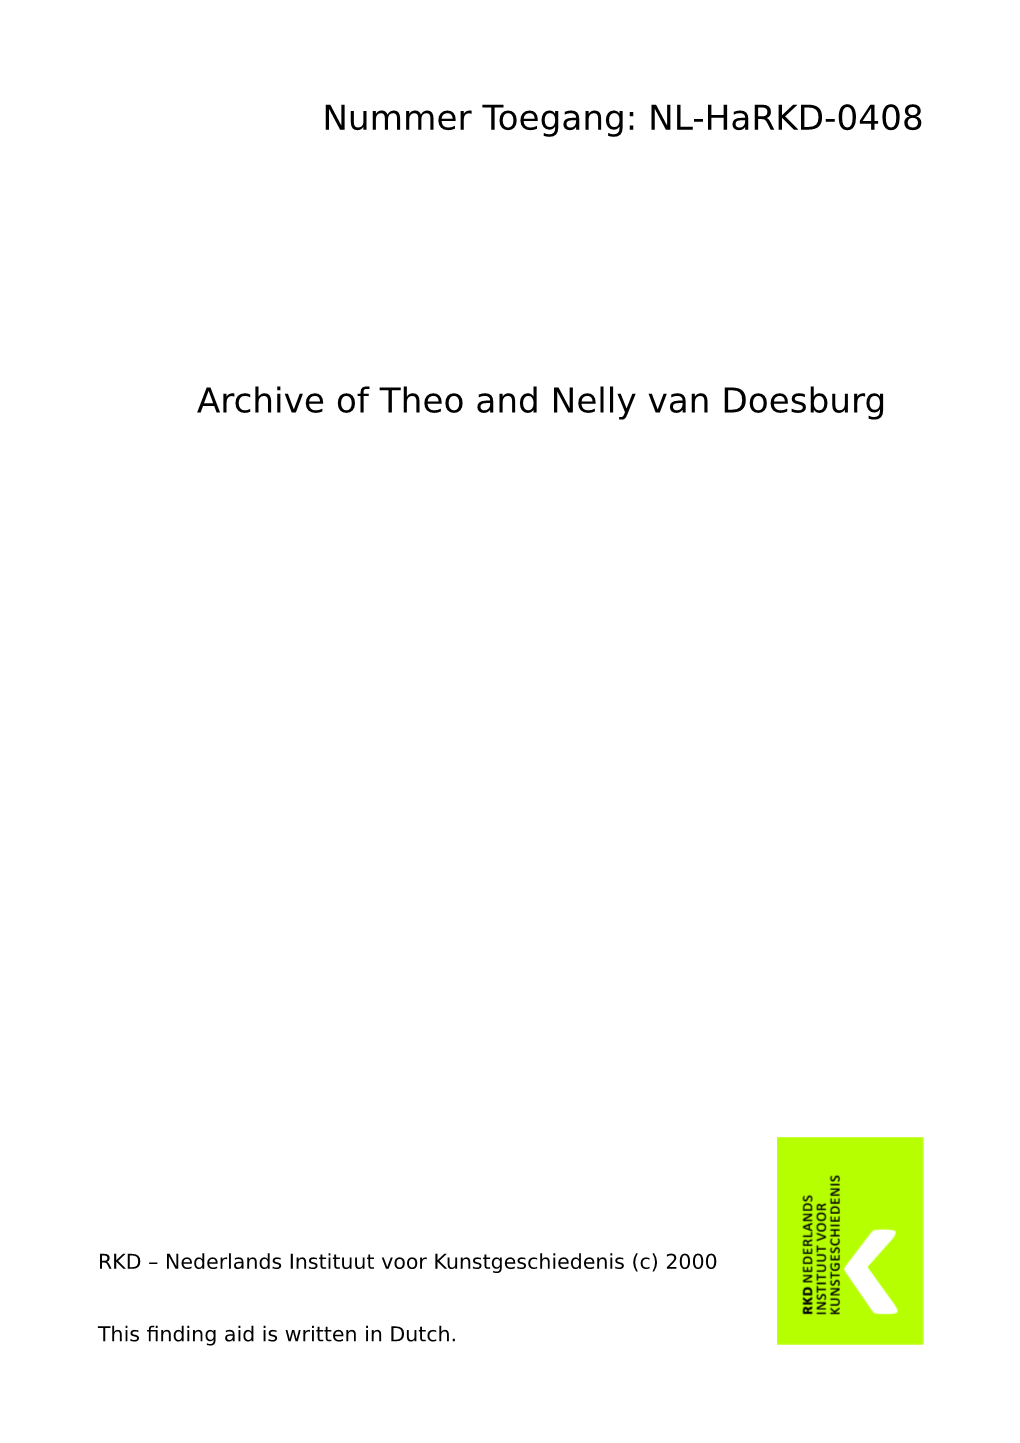 NL-Harkd-0408 Archive of Theo and Nelly Van Doesburg